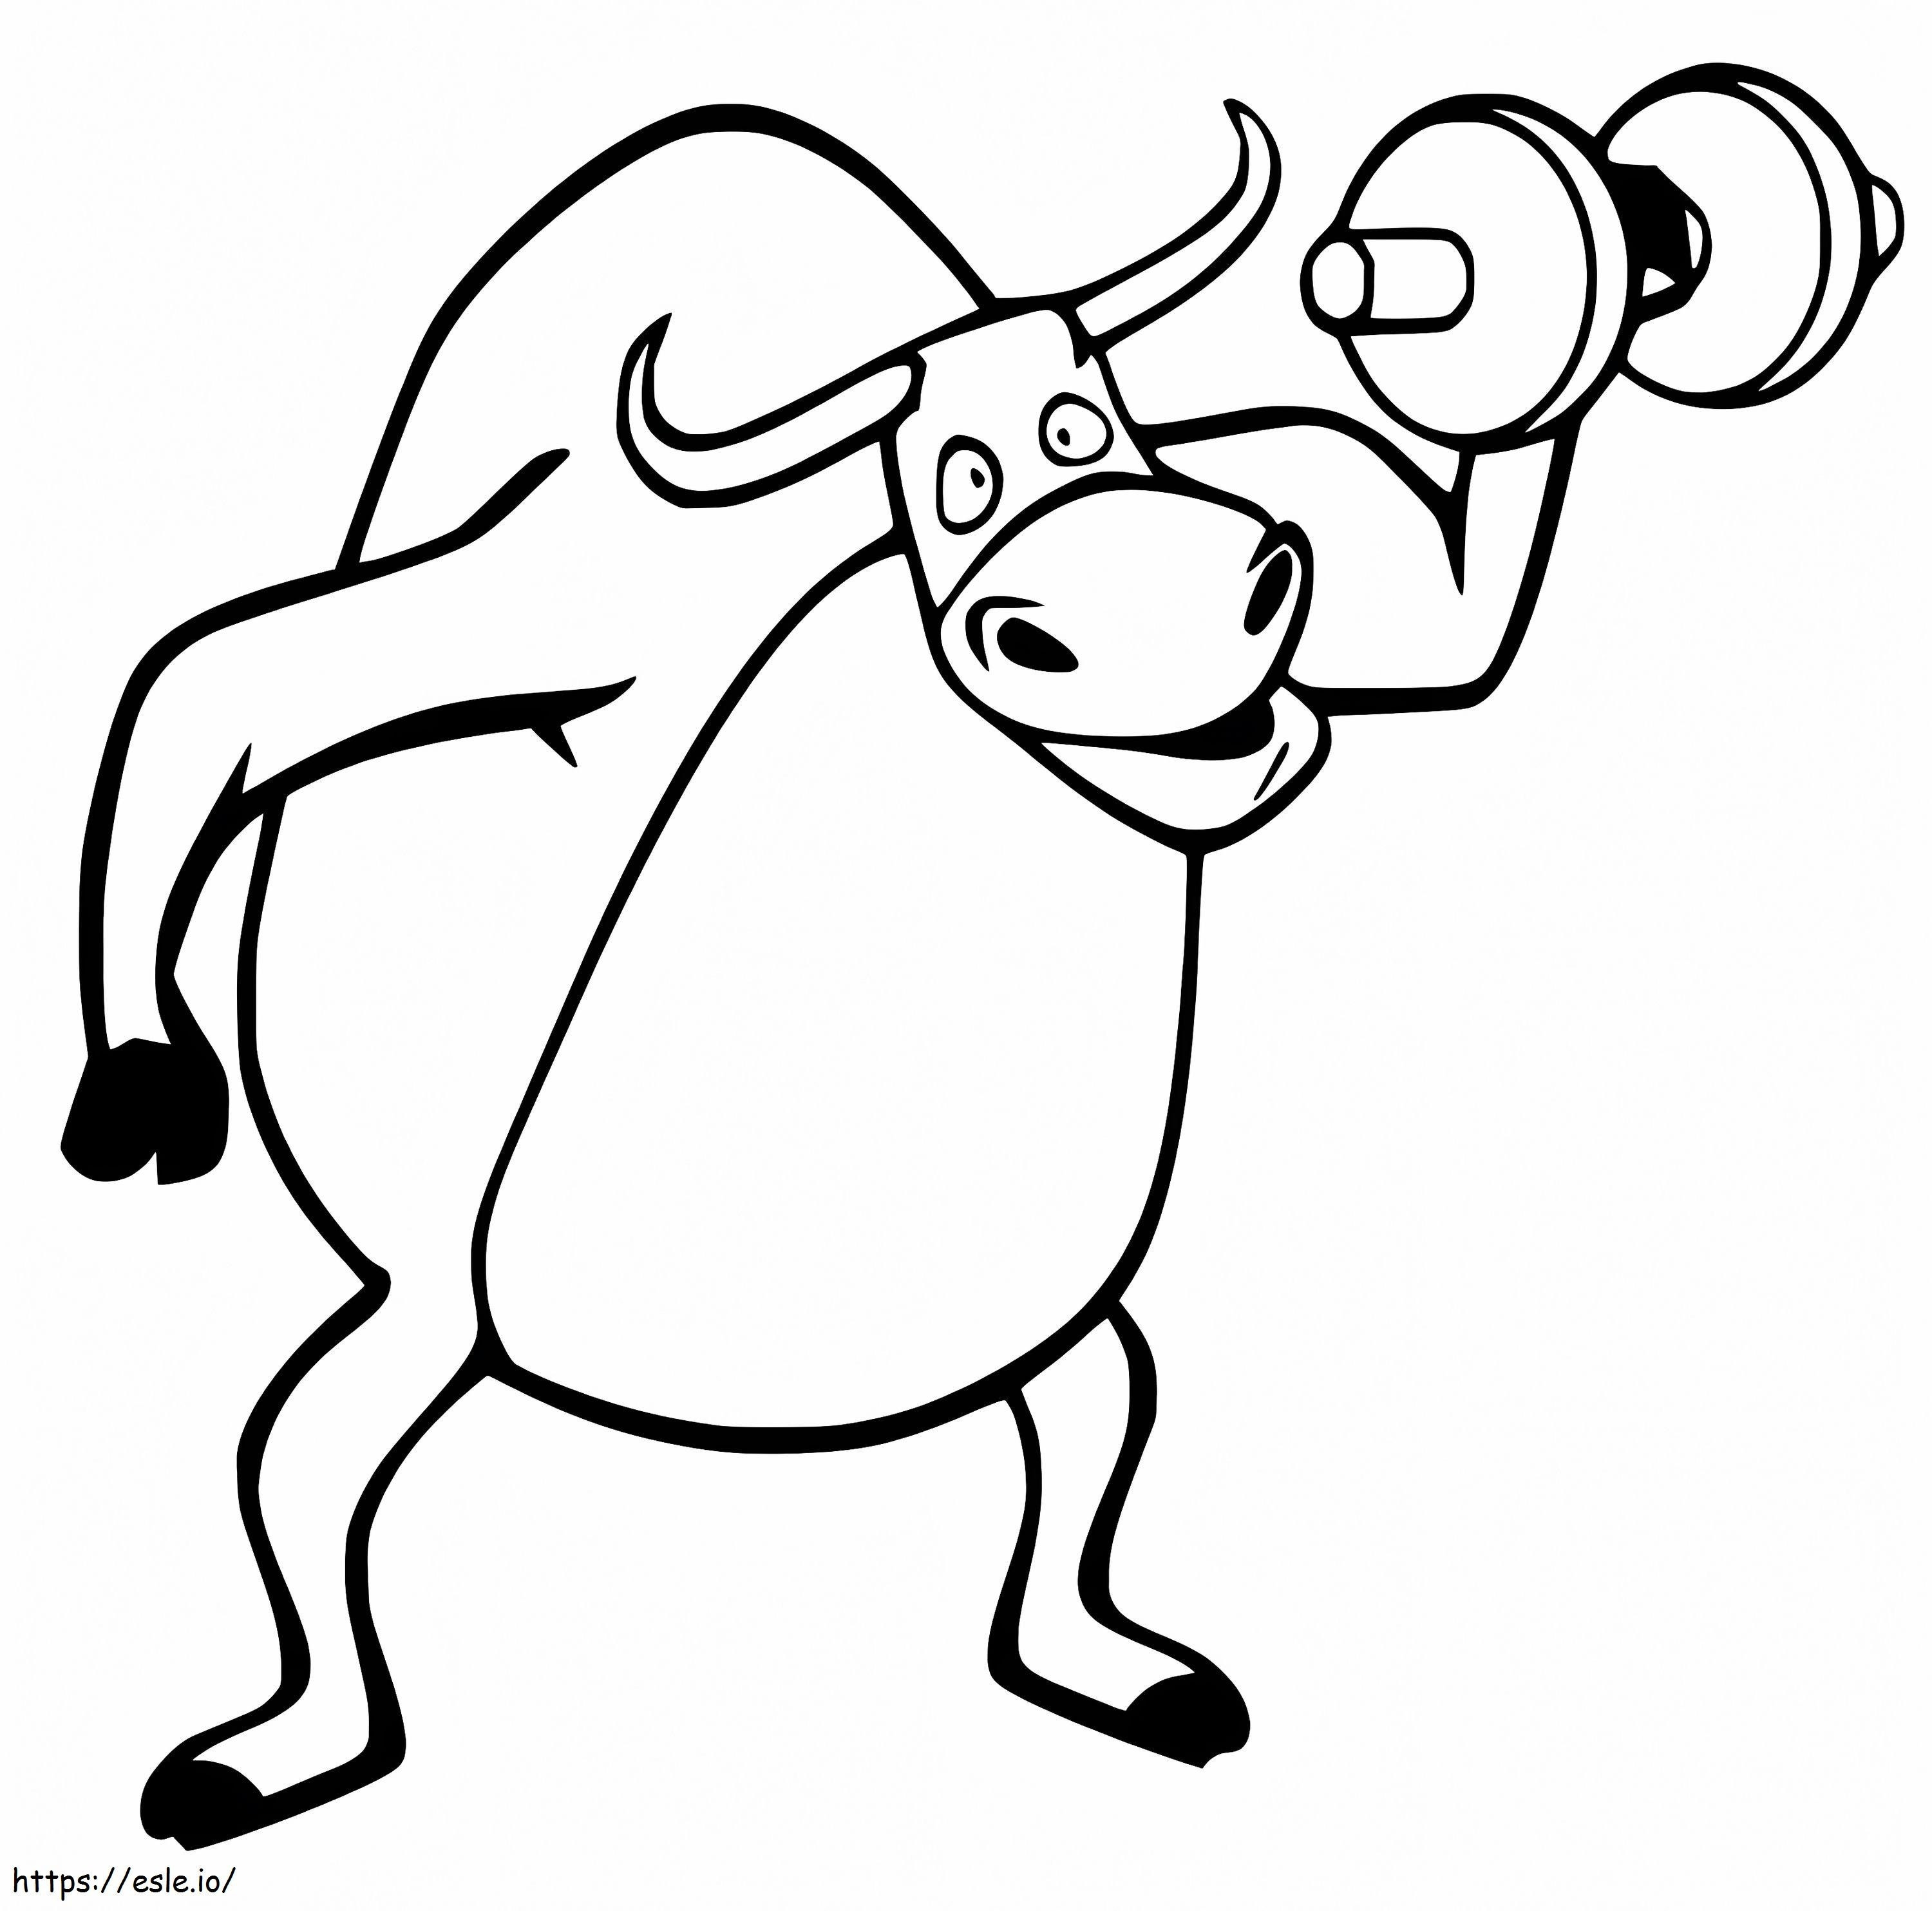 Weightlifting Bull coloring page